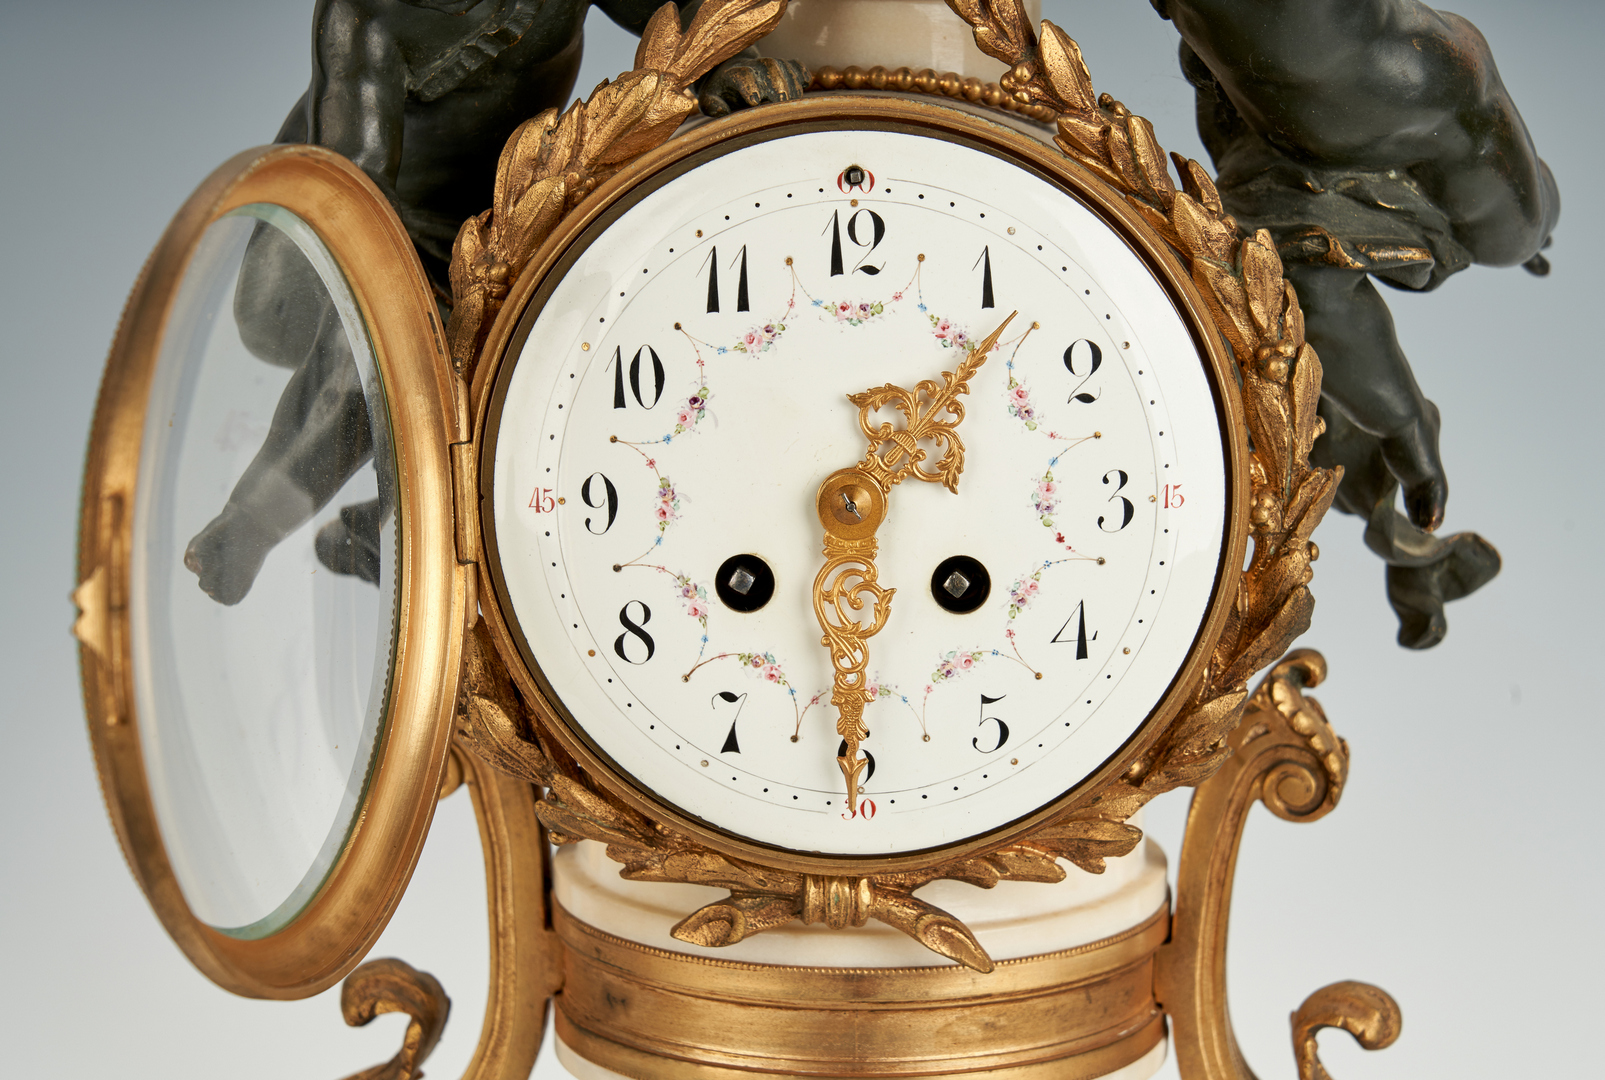 Lot 202: 3 Pc. French Neo-Classical Clock Set